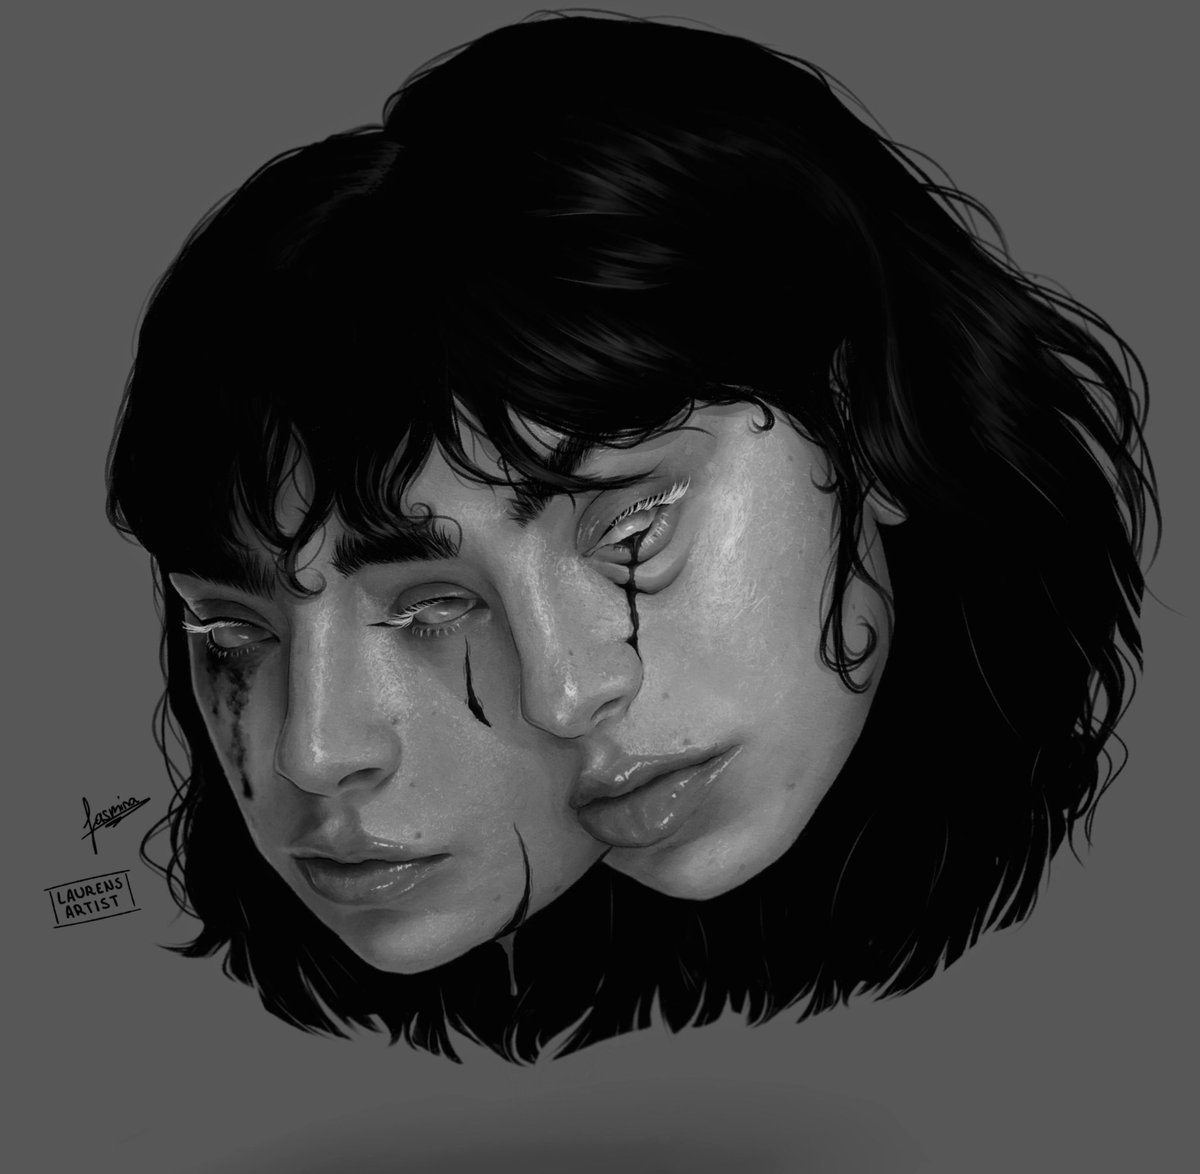 RT @witchmina: DREW THIS IN HONOR OF POP 2 ???????????? || .@charli_xcx https://t.co/HqkaqqUWuf